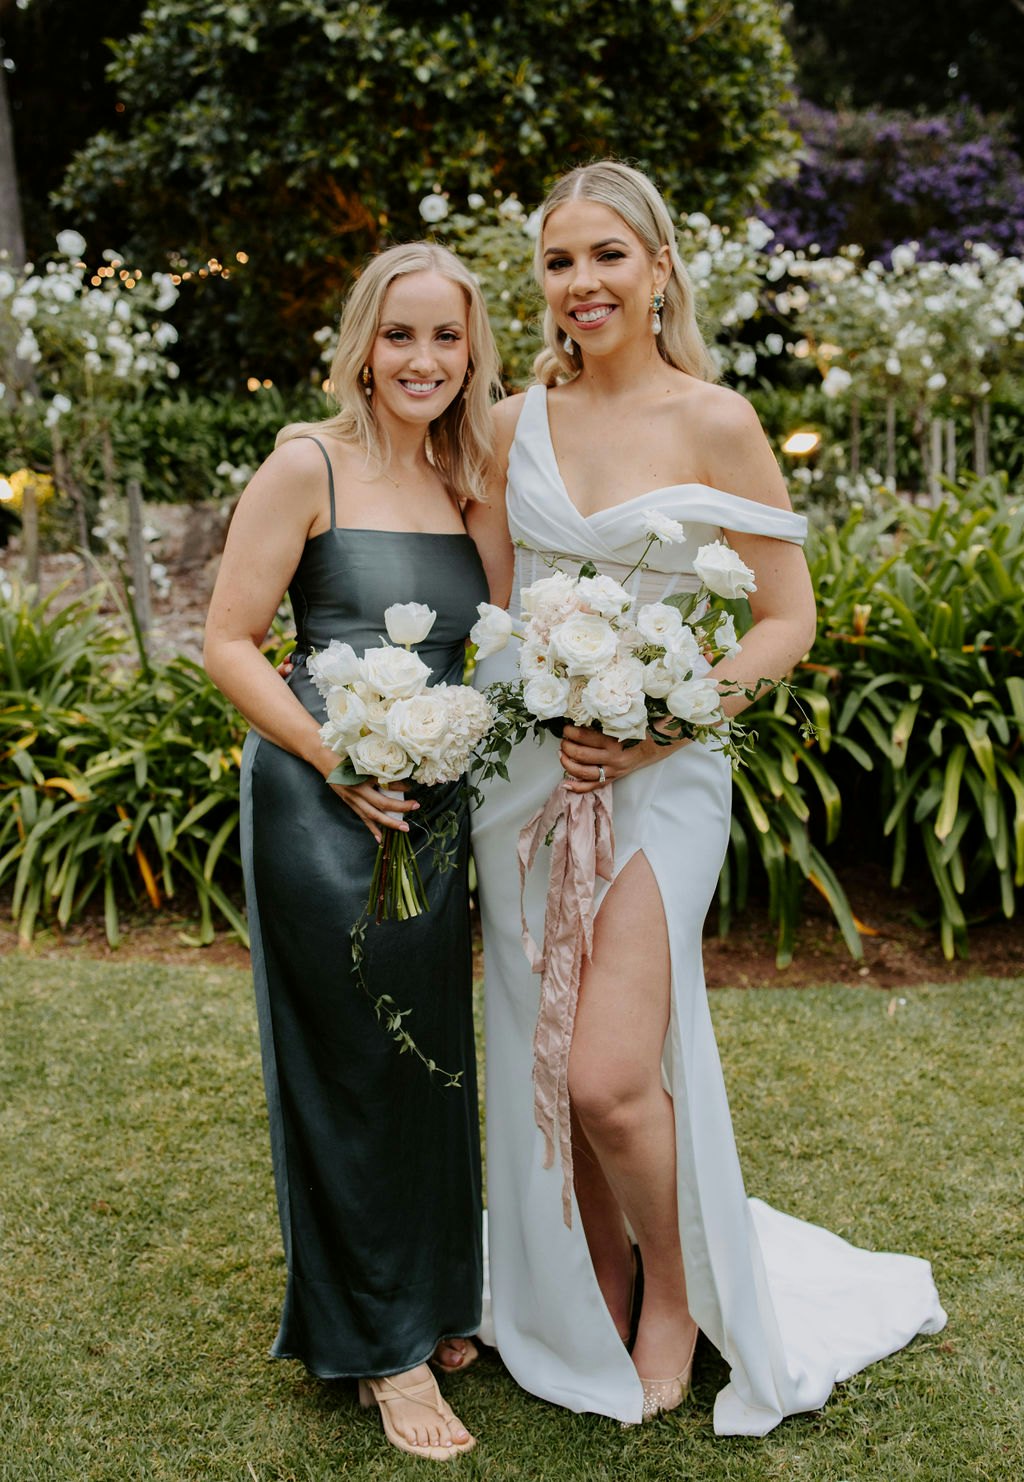 Bride and bridesmaid holding flowers